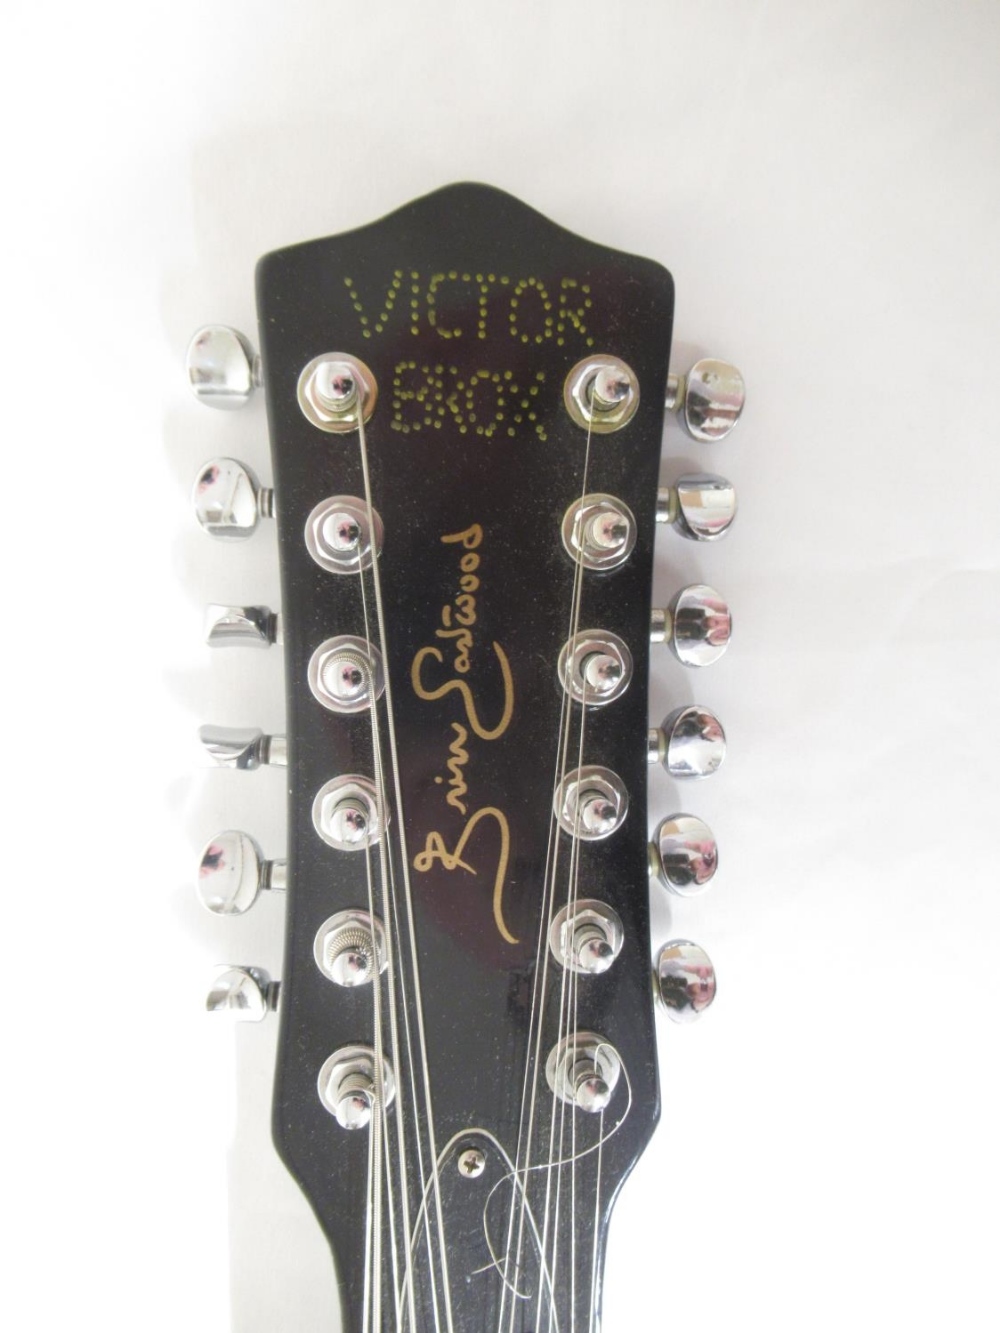 Brian Eastwood 'Victor Brox' custom build 12 string electric guitar, L114.5cm with black leather - Image 2 of 7